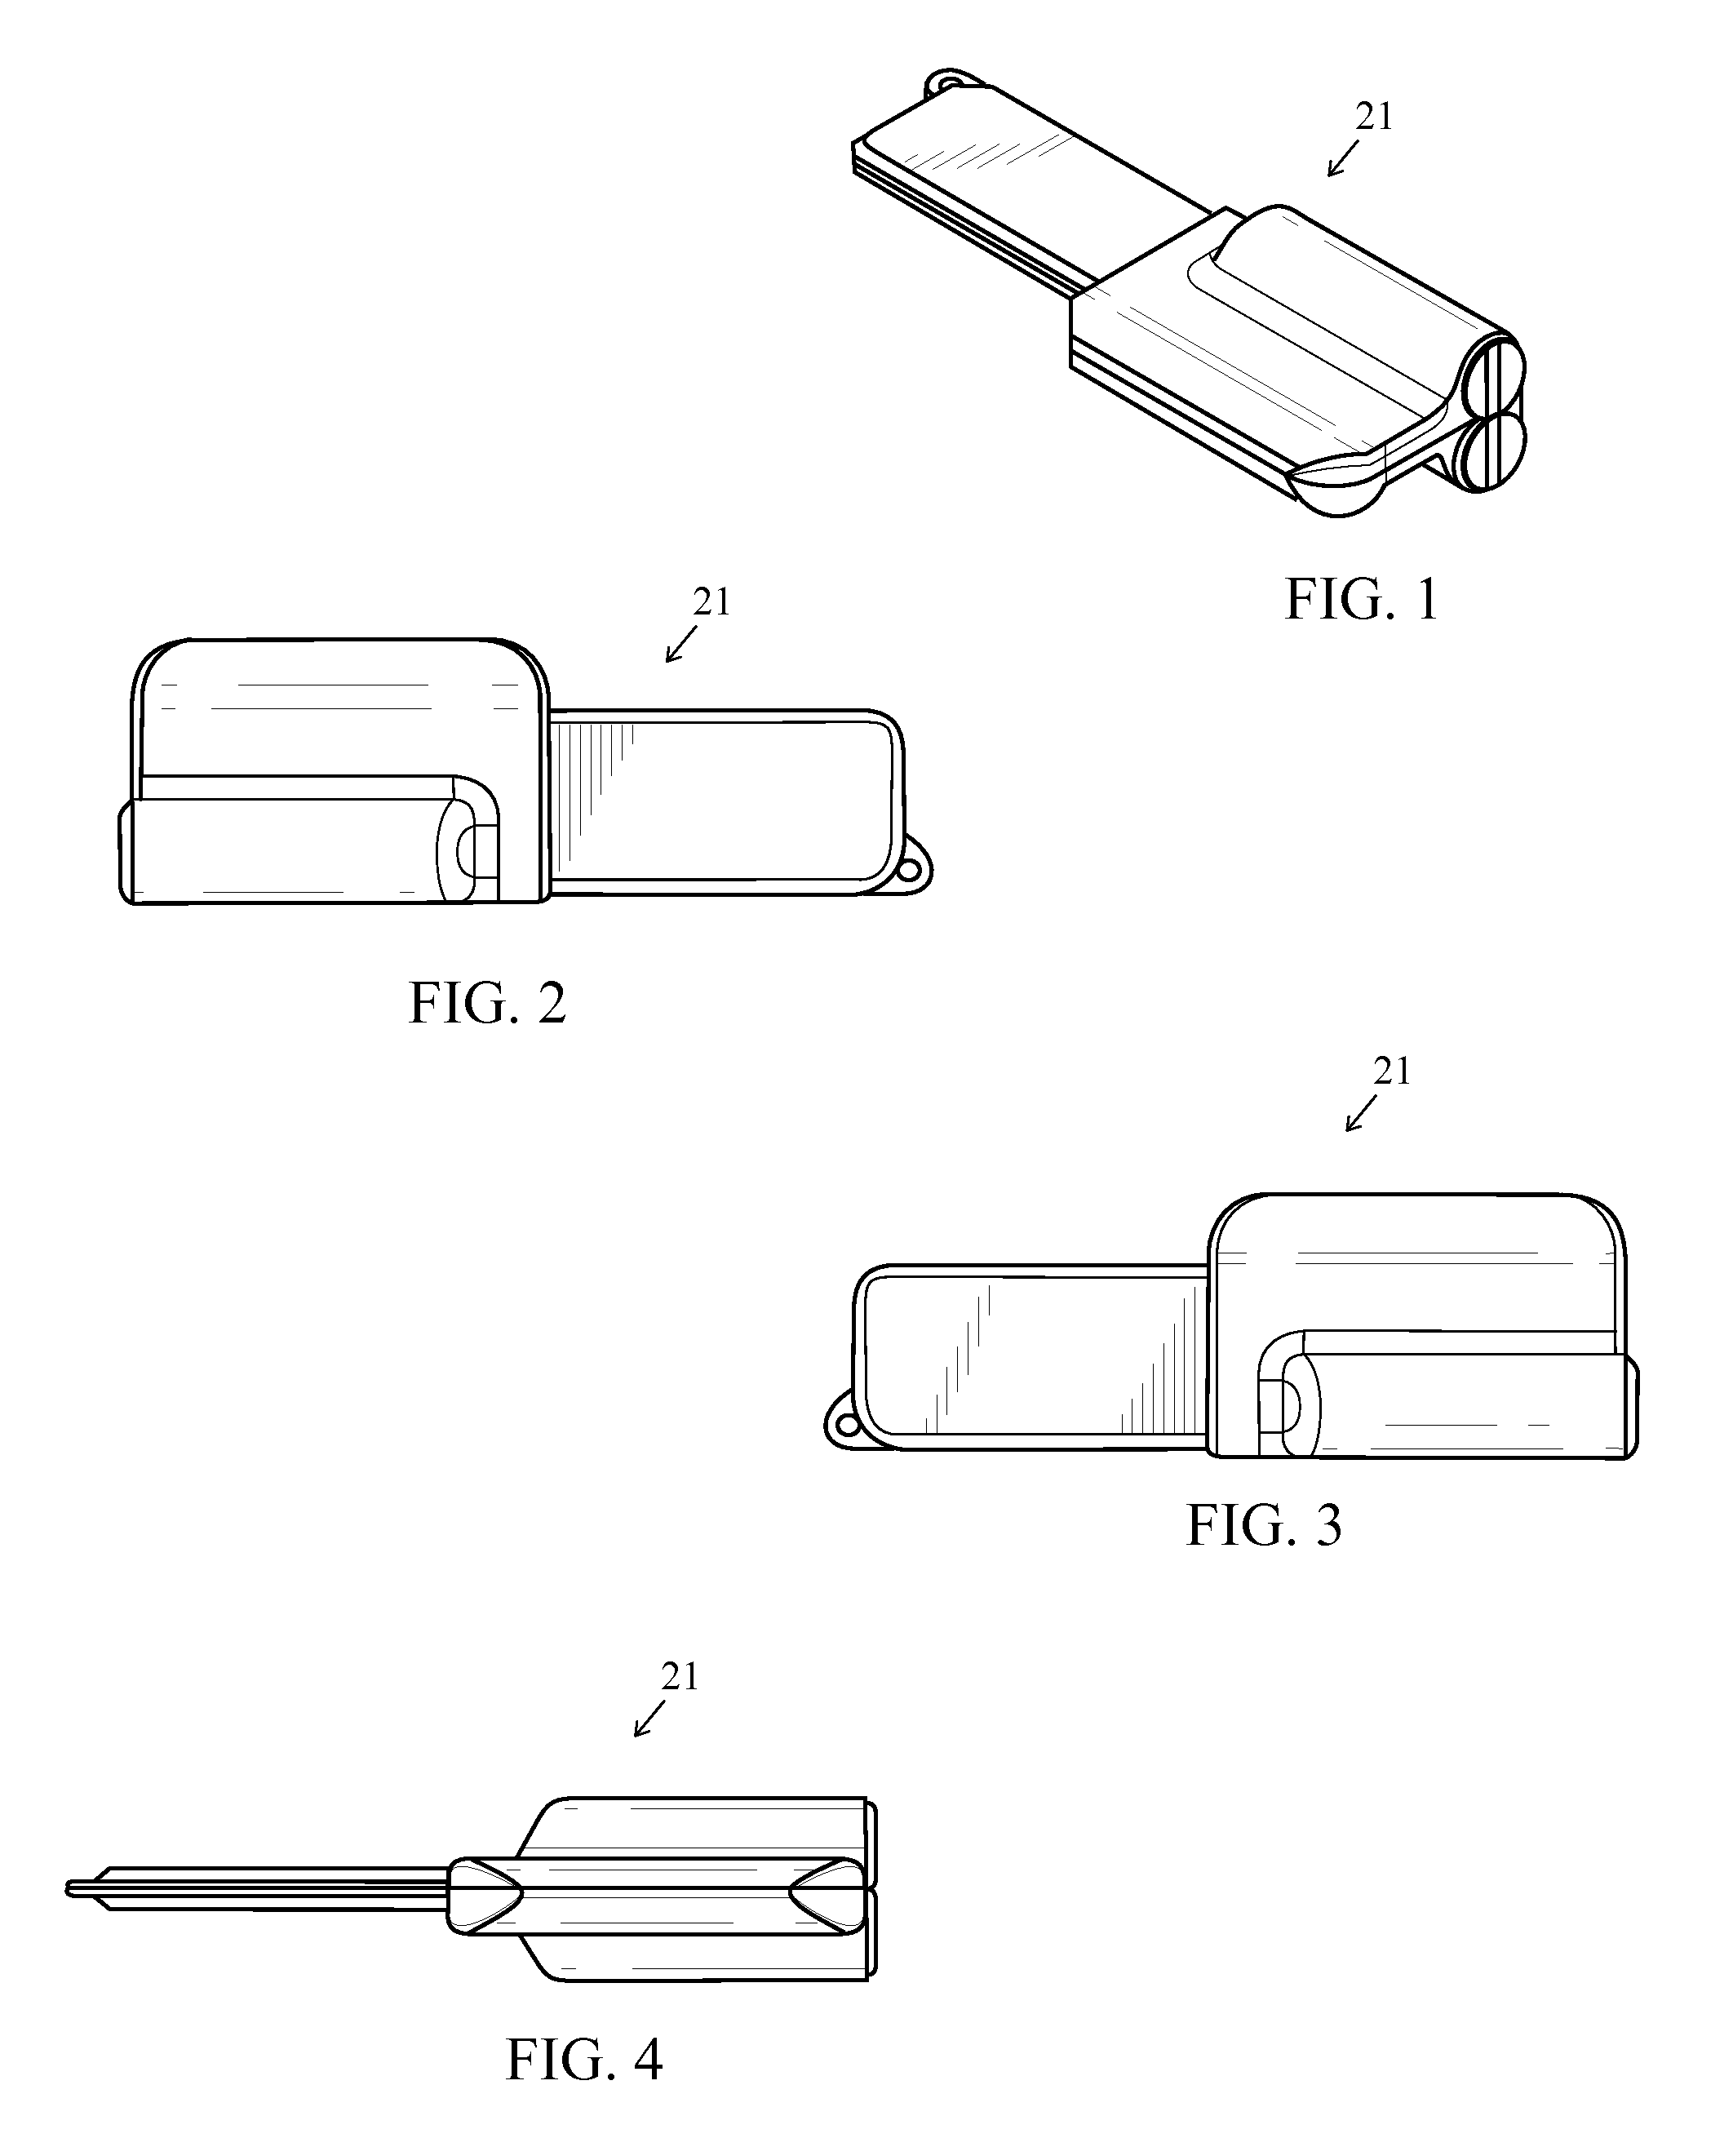 RF amplifier tuning method for coping with expected variations in local dielectric